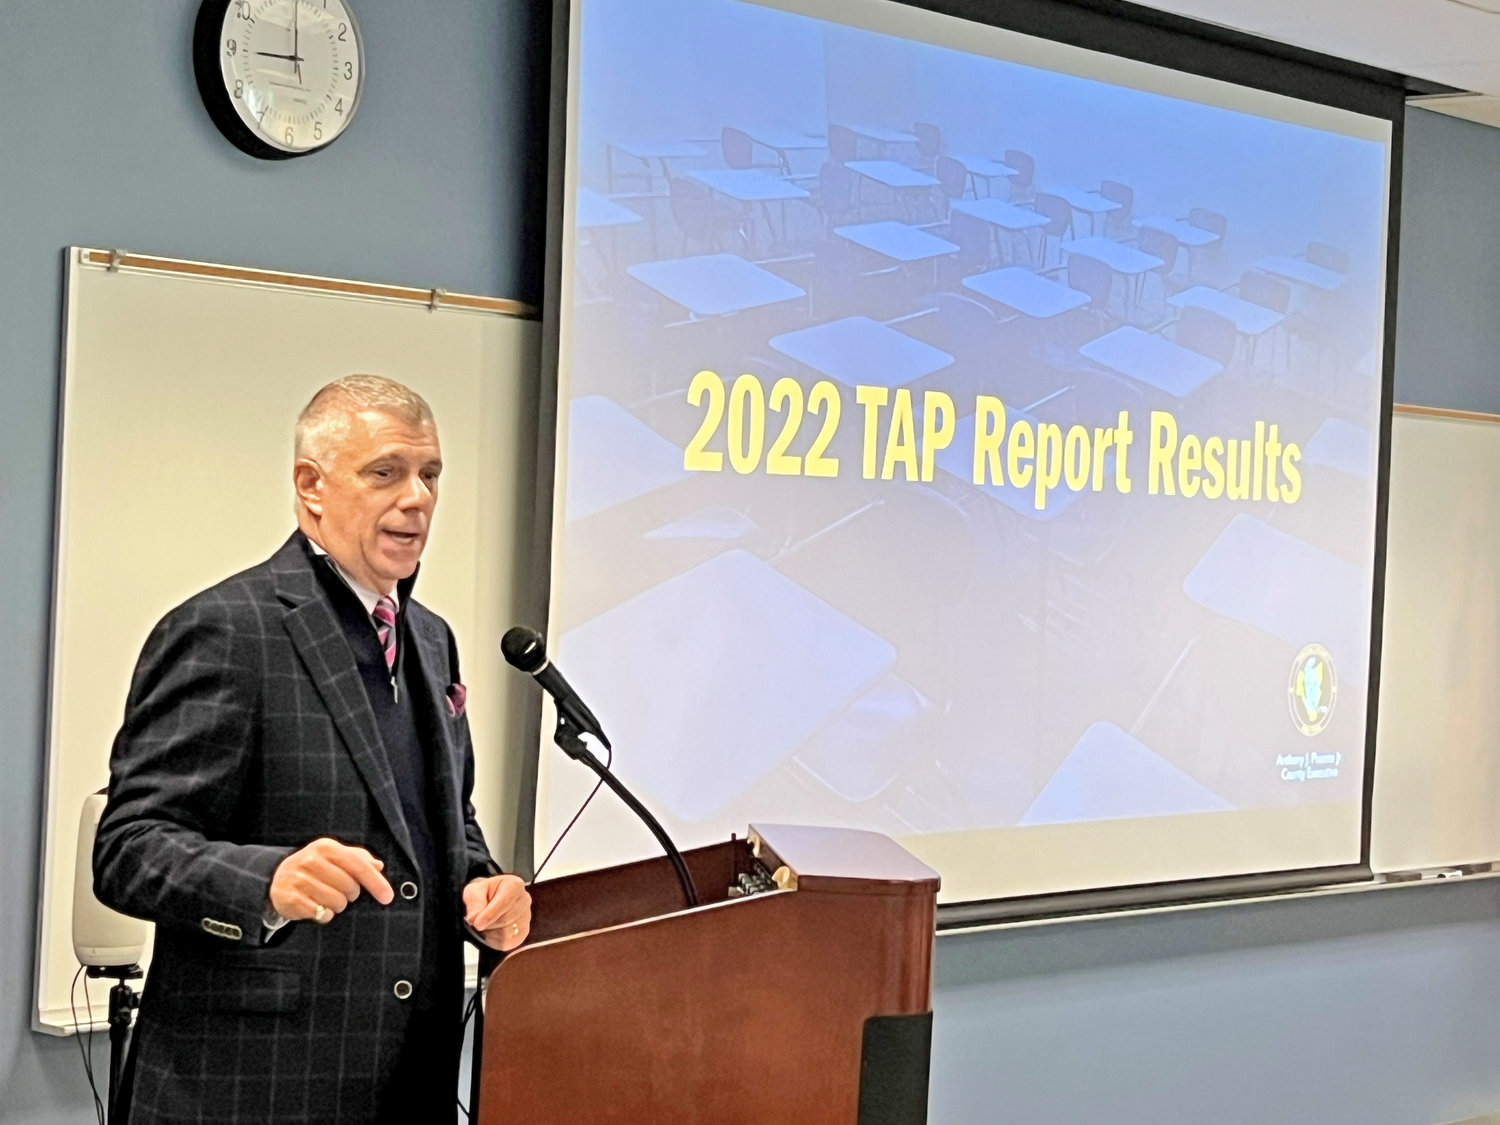 Oneida County Executive Anthony J. Picente Jr. presents the results of Oneida County’s 2022 COVD-19 TAP Survey to the Oneida County Youth Service Council at Mohawk Valley Community College on Friday. The survey, Picente said, shows significant impacts from the COVID-19 pandemic on local youth.